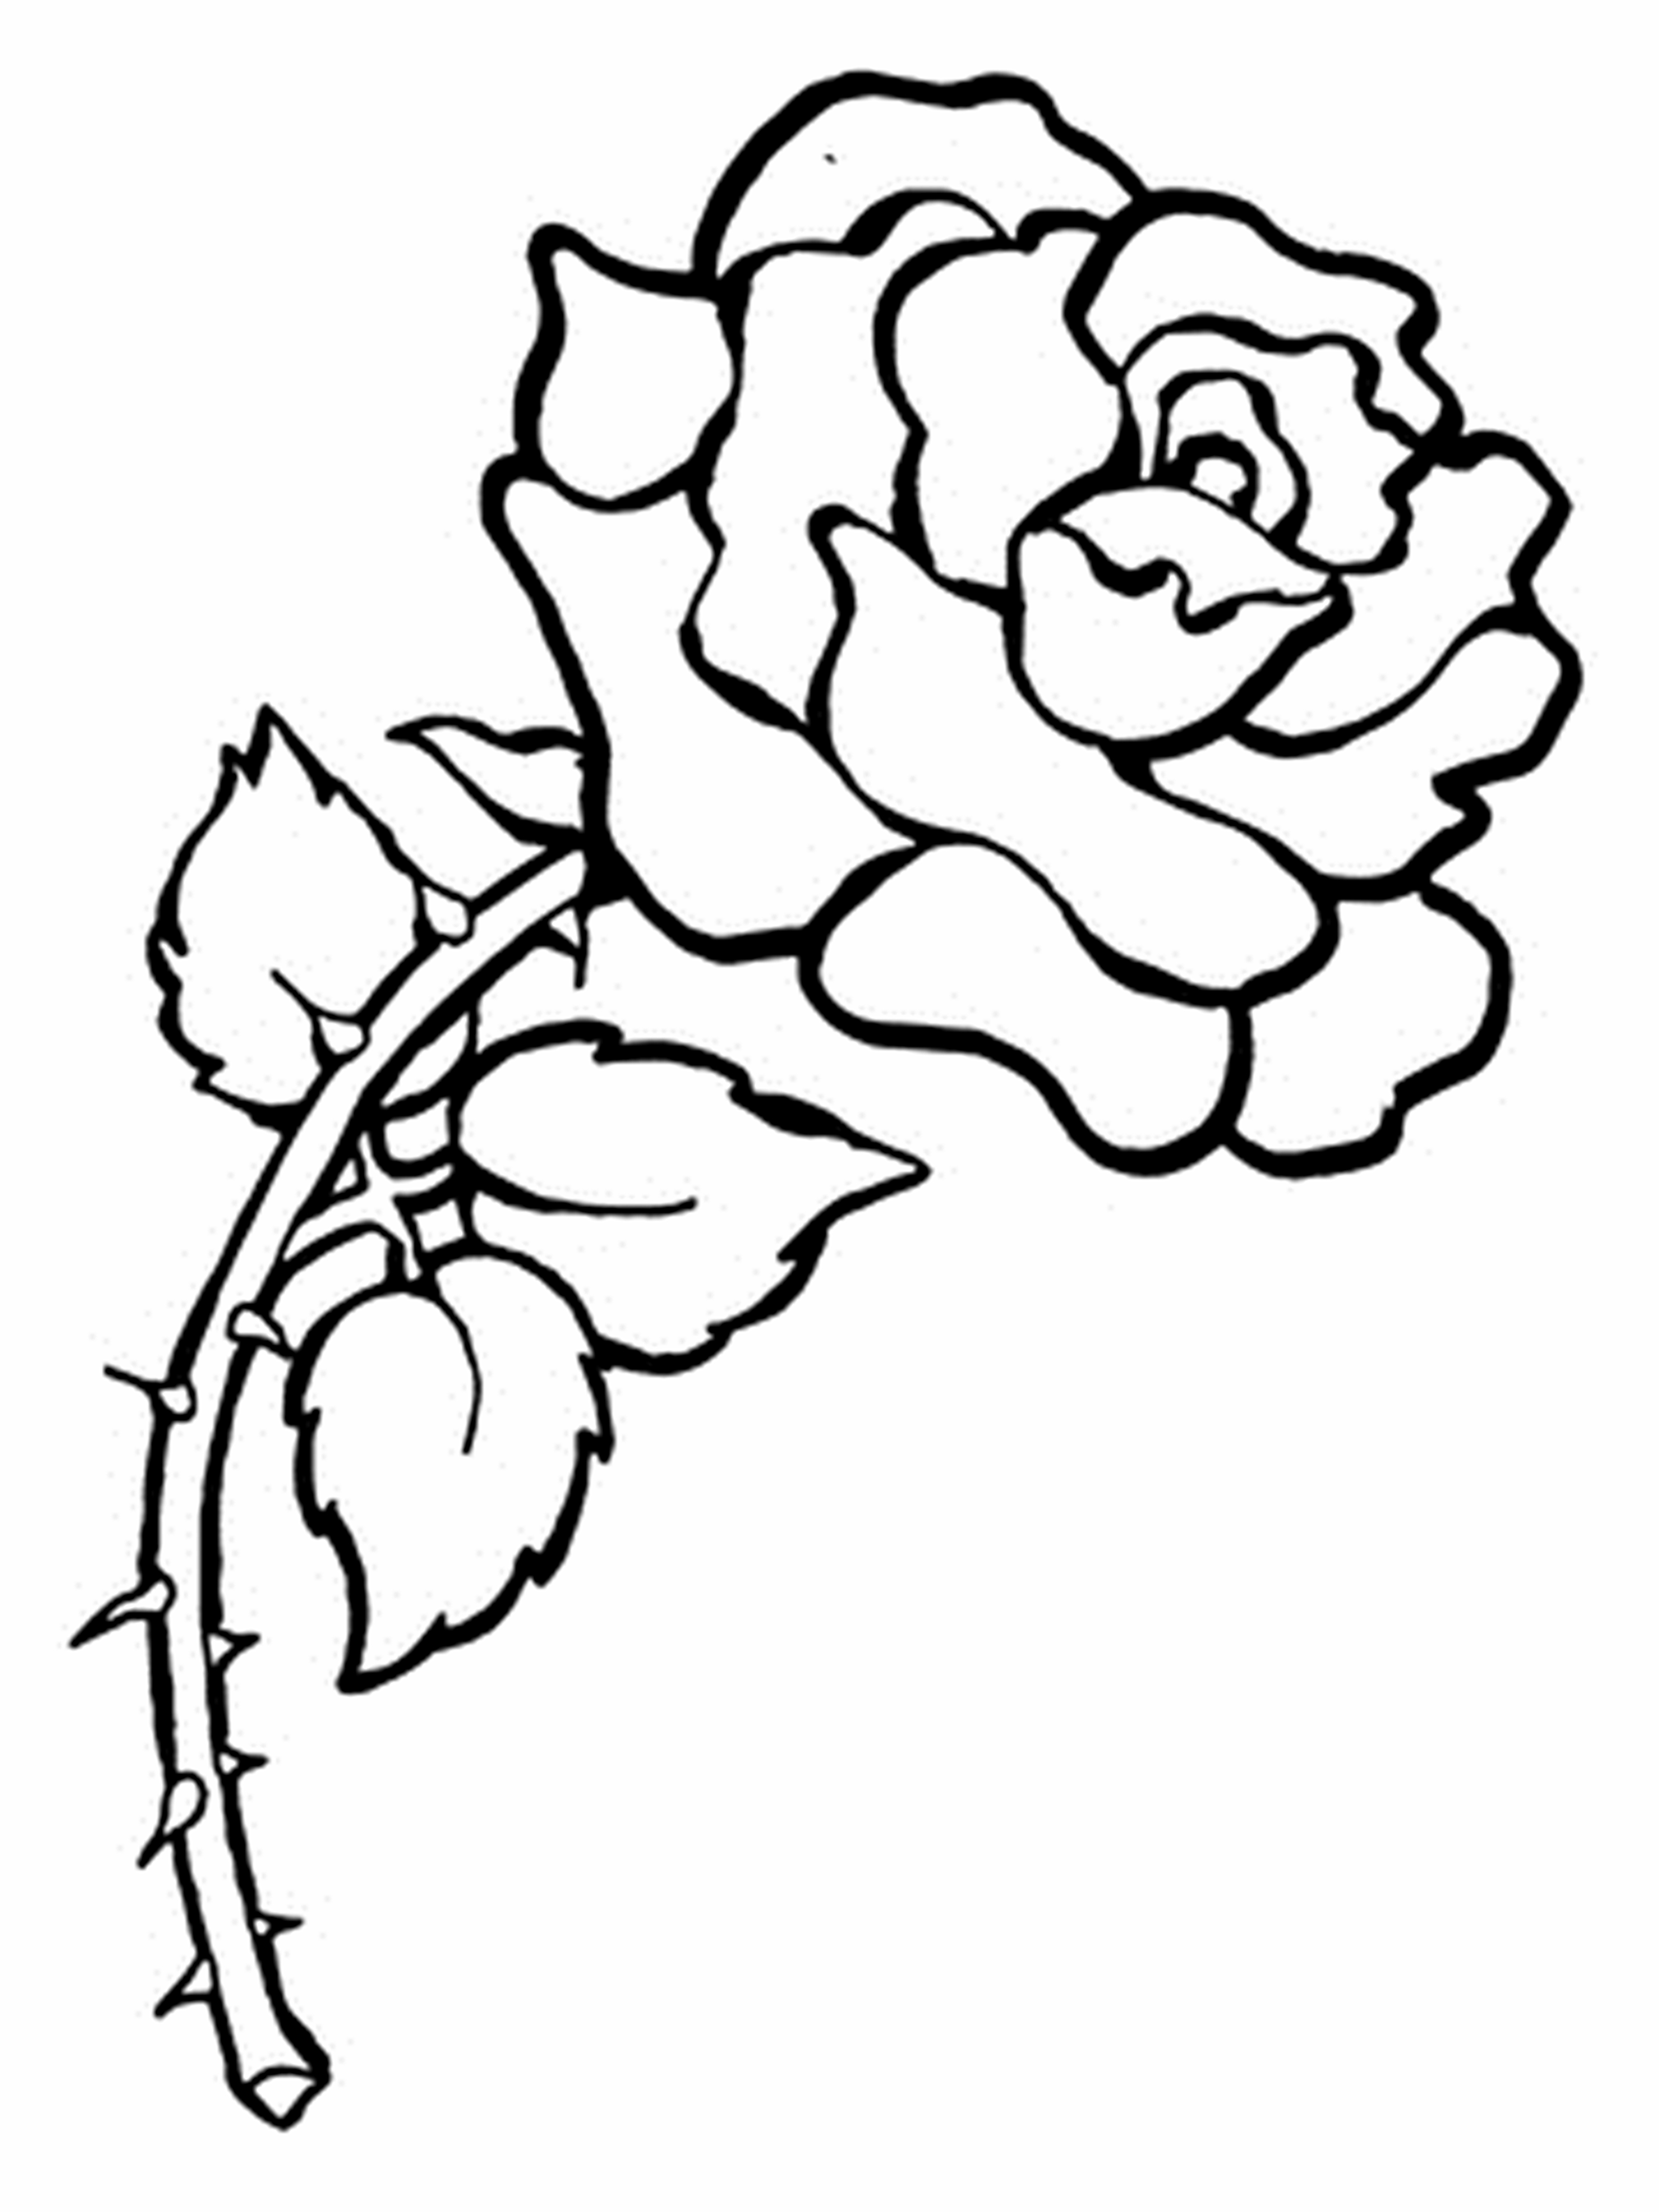 Free Printable Flower Coloring Pages For Kids Best Coloring Wallpapers Download Free Images Wallpaper [coloring436.blogspot.com]